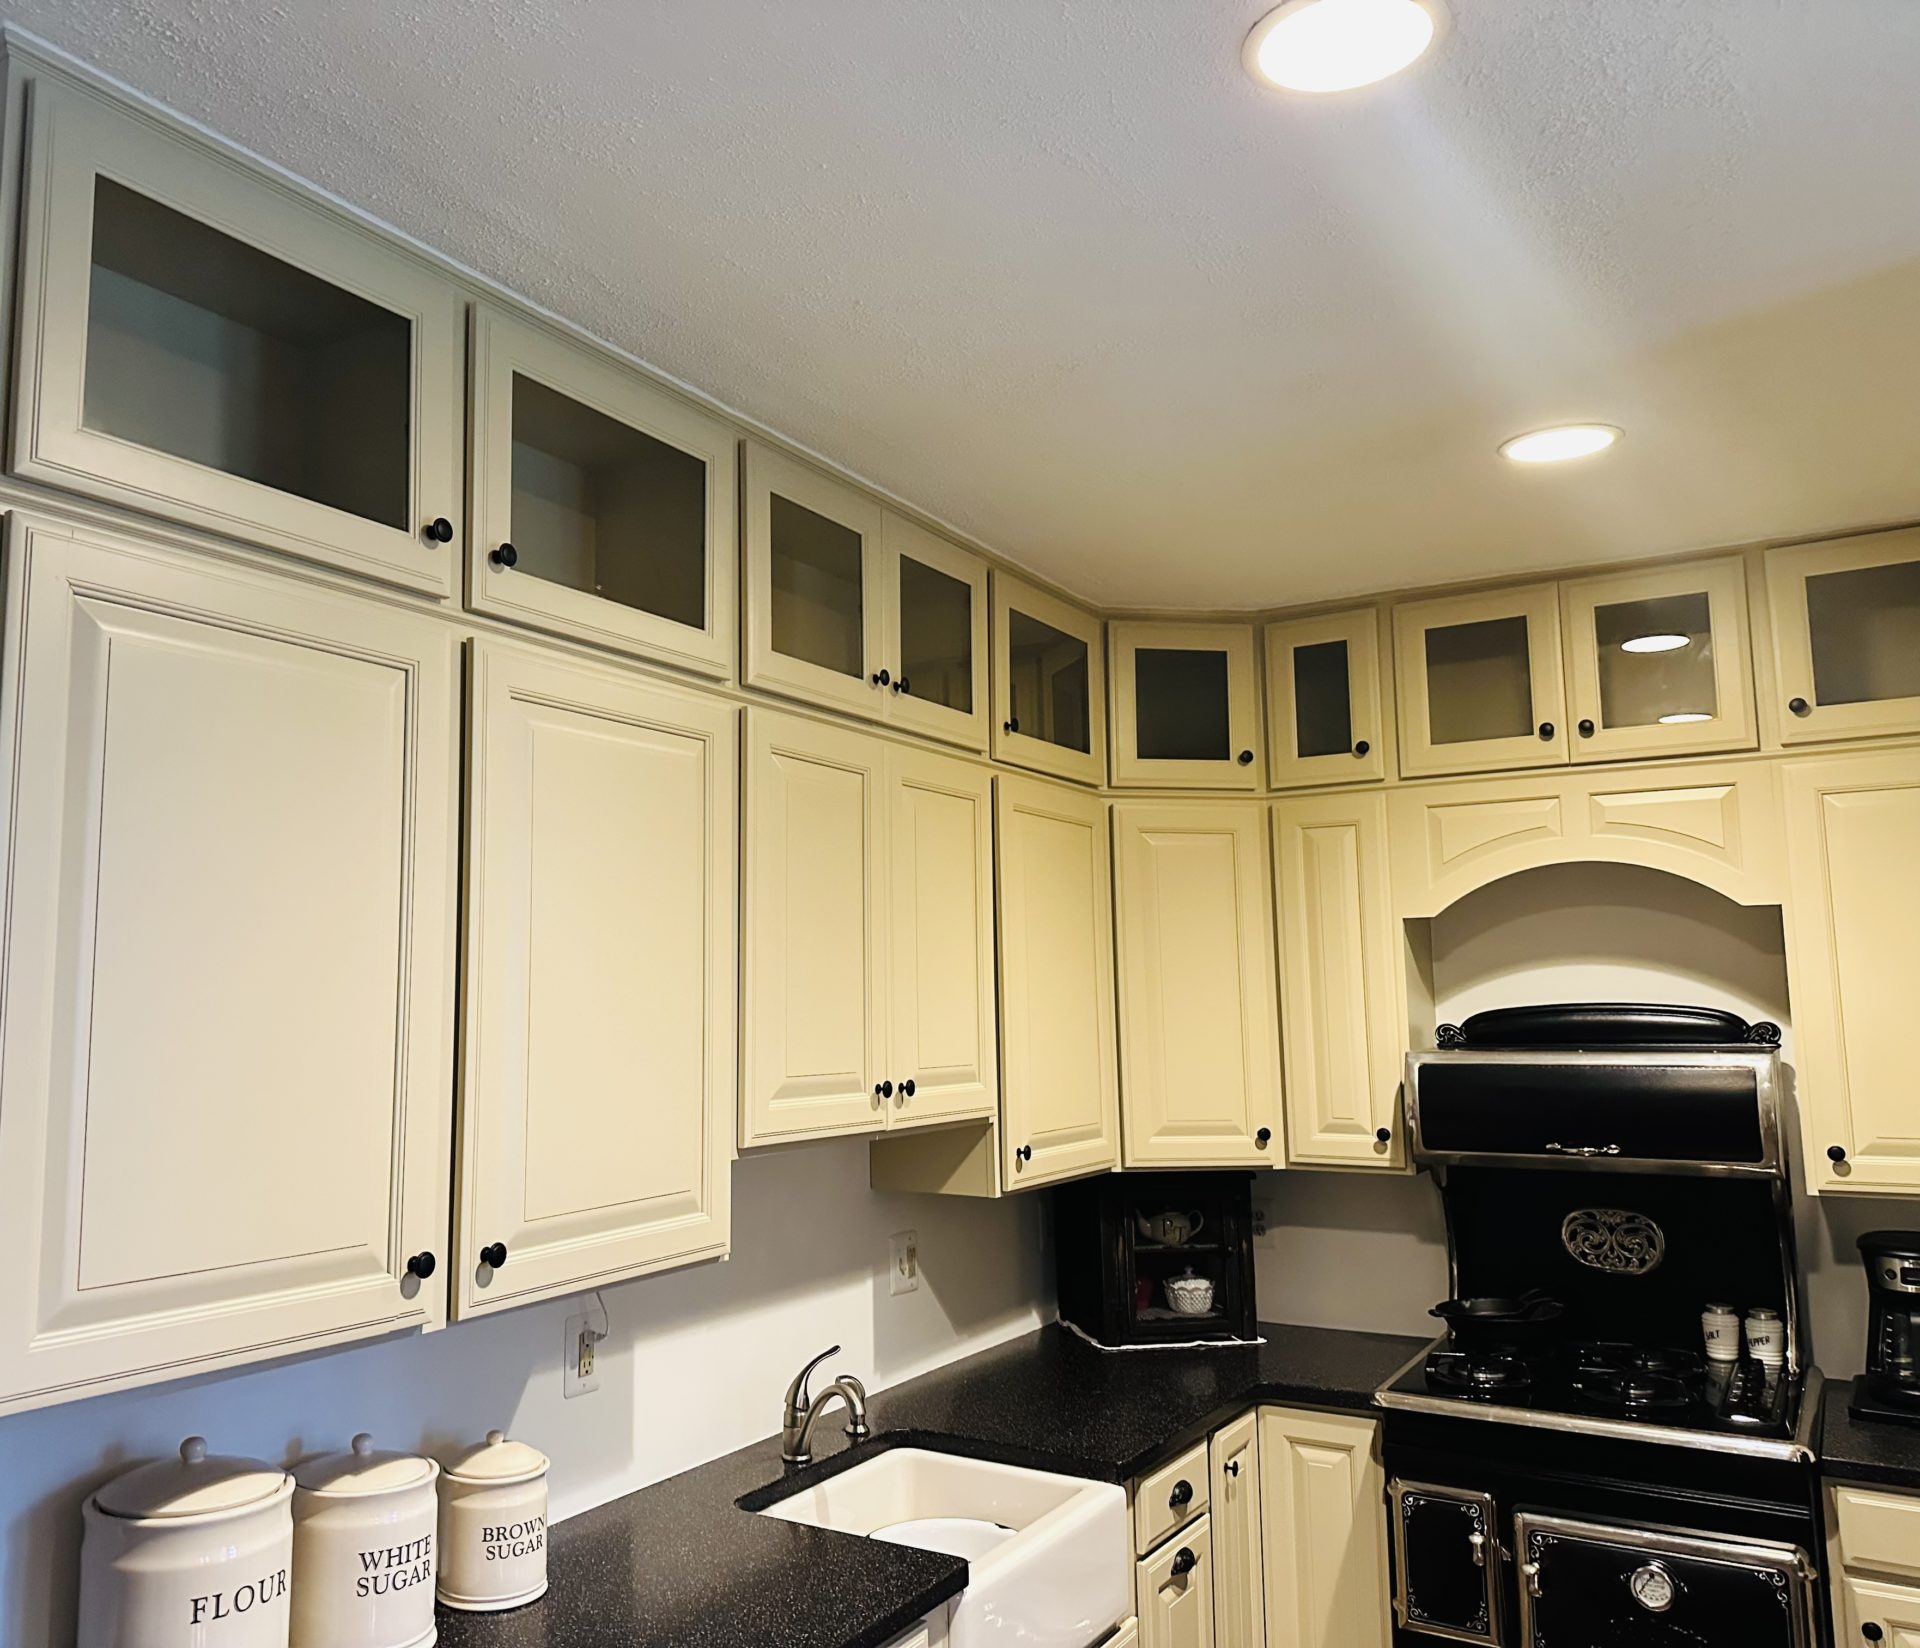 Freshly painted cabinets services results in kitchen space